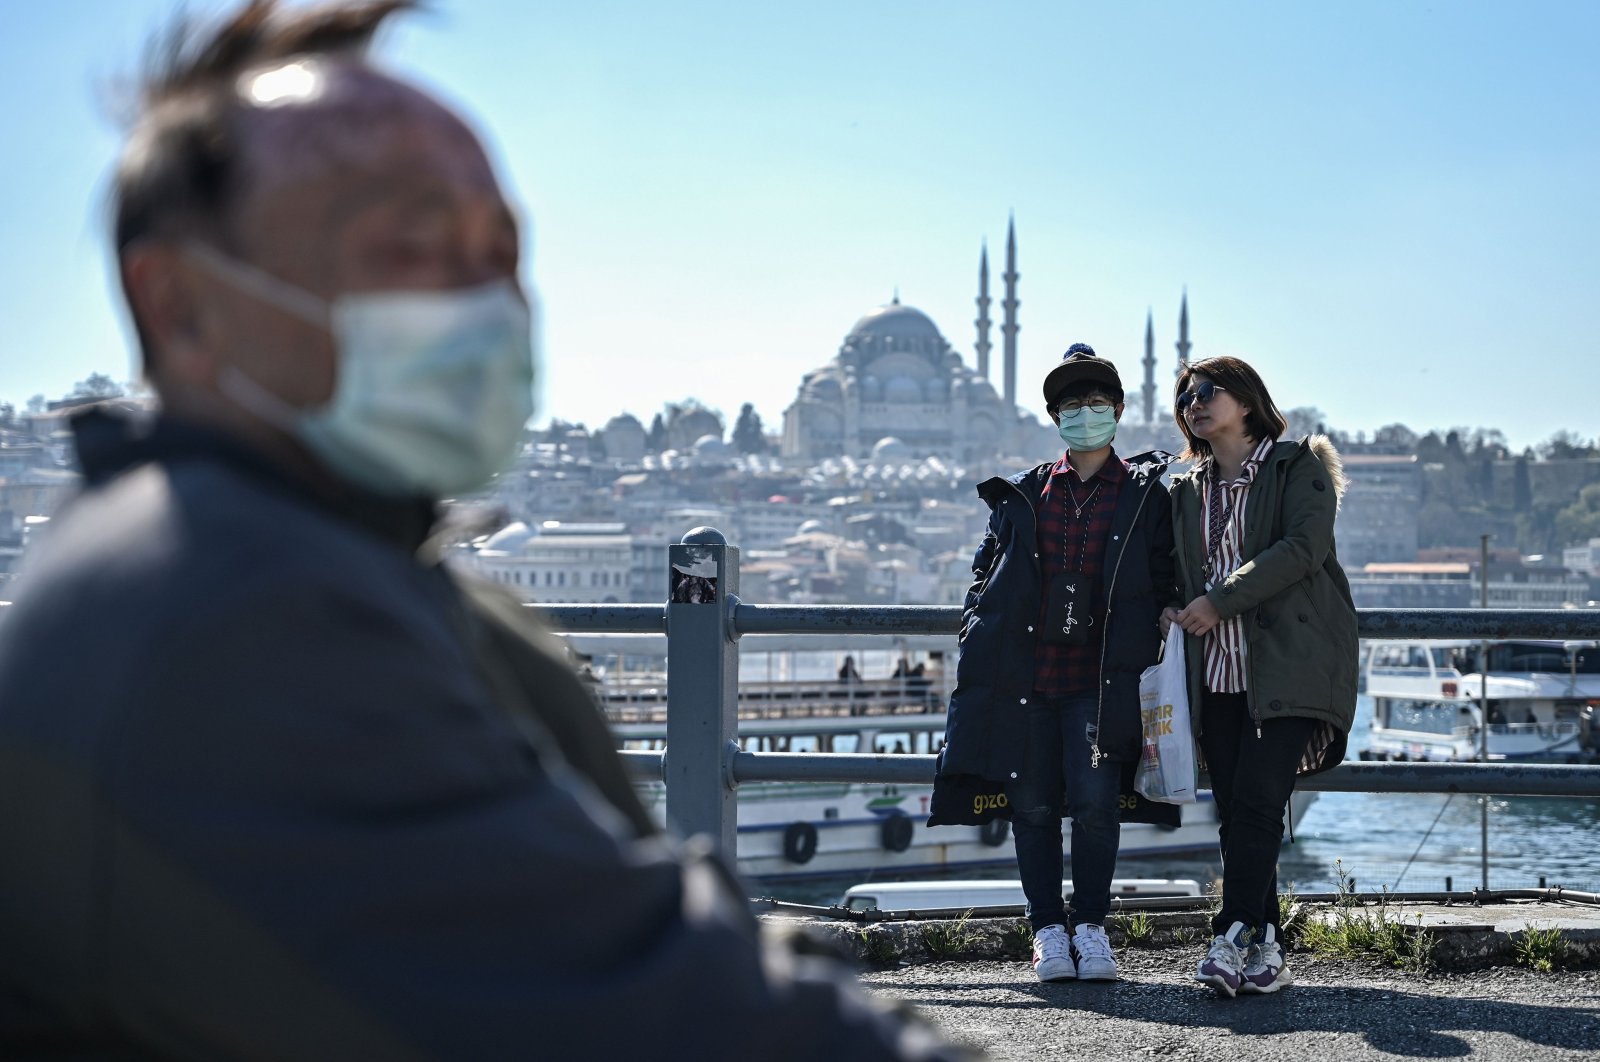 Tourists wearing face masks sit and stand on Galata Bridge in Istanbul, on March 13, 2020, amid the outbreak of COVID-19, the new coronavirus. (AFP Photo)